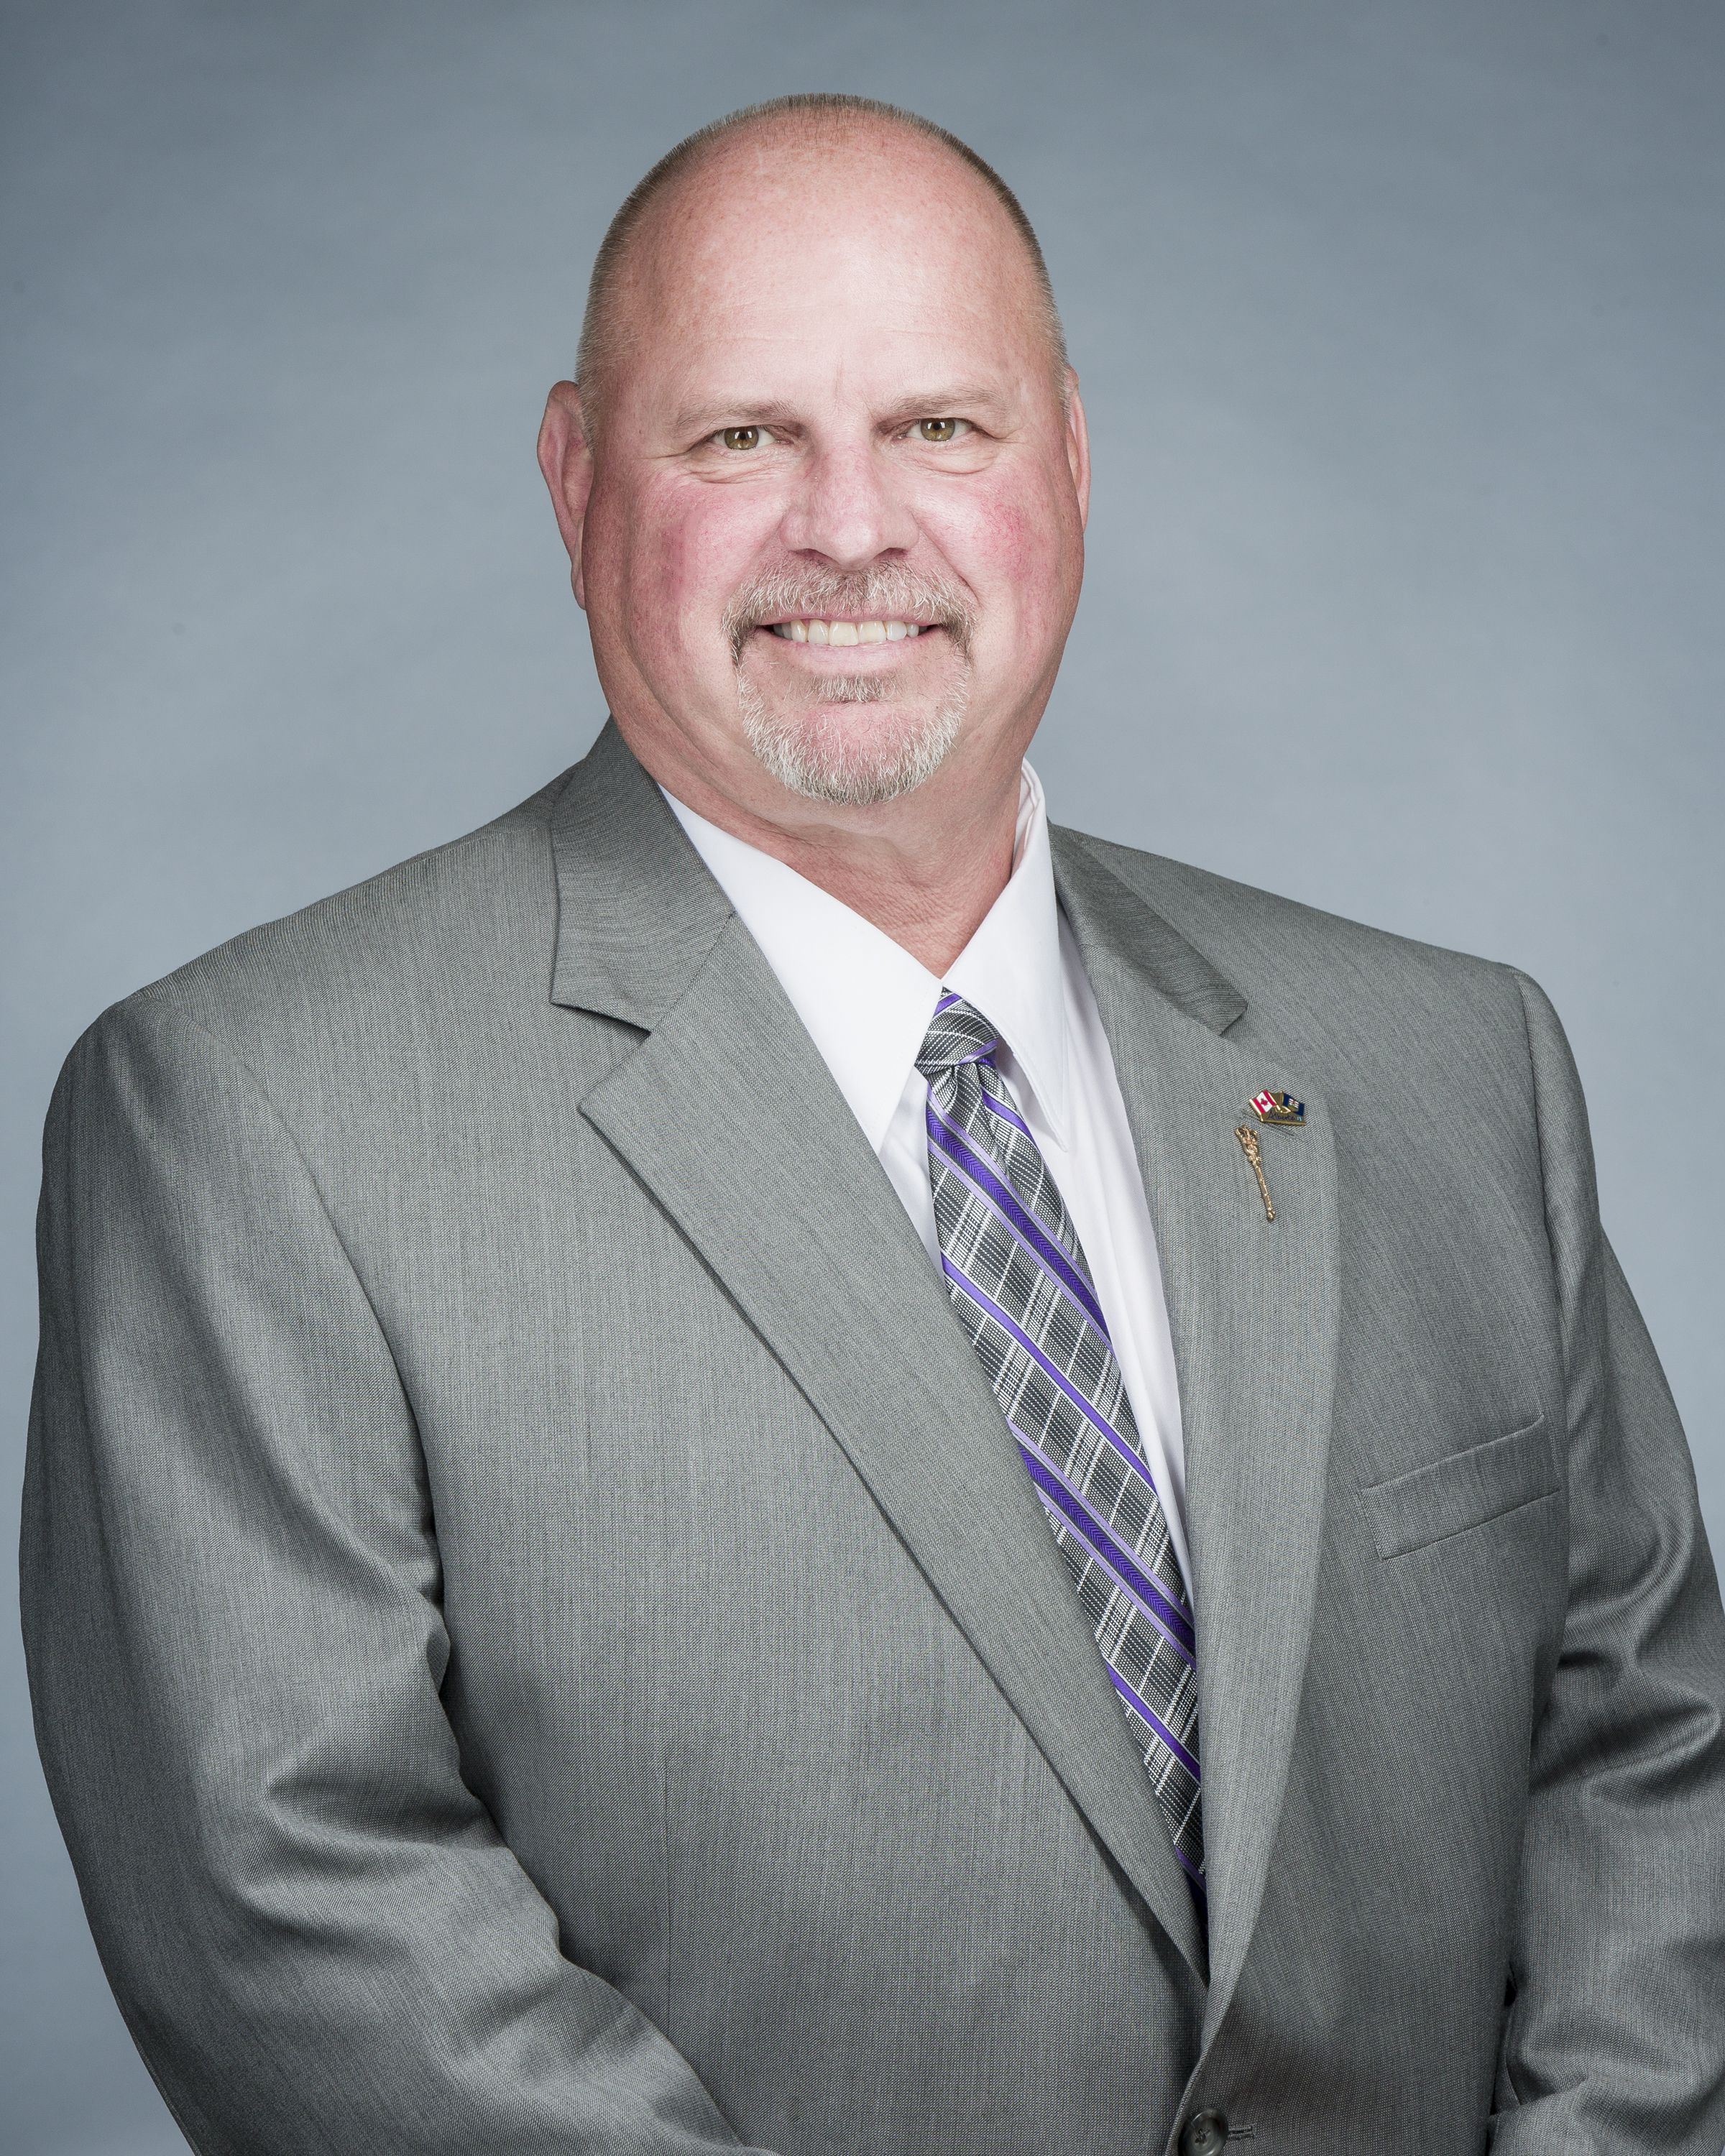 NCRA President Anderson earns shout-out